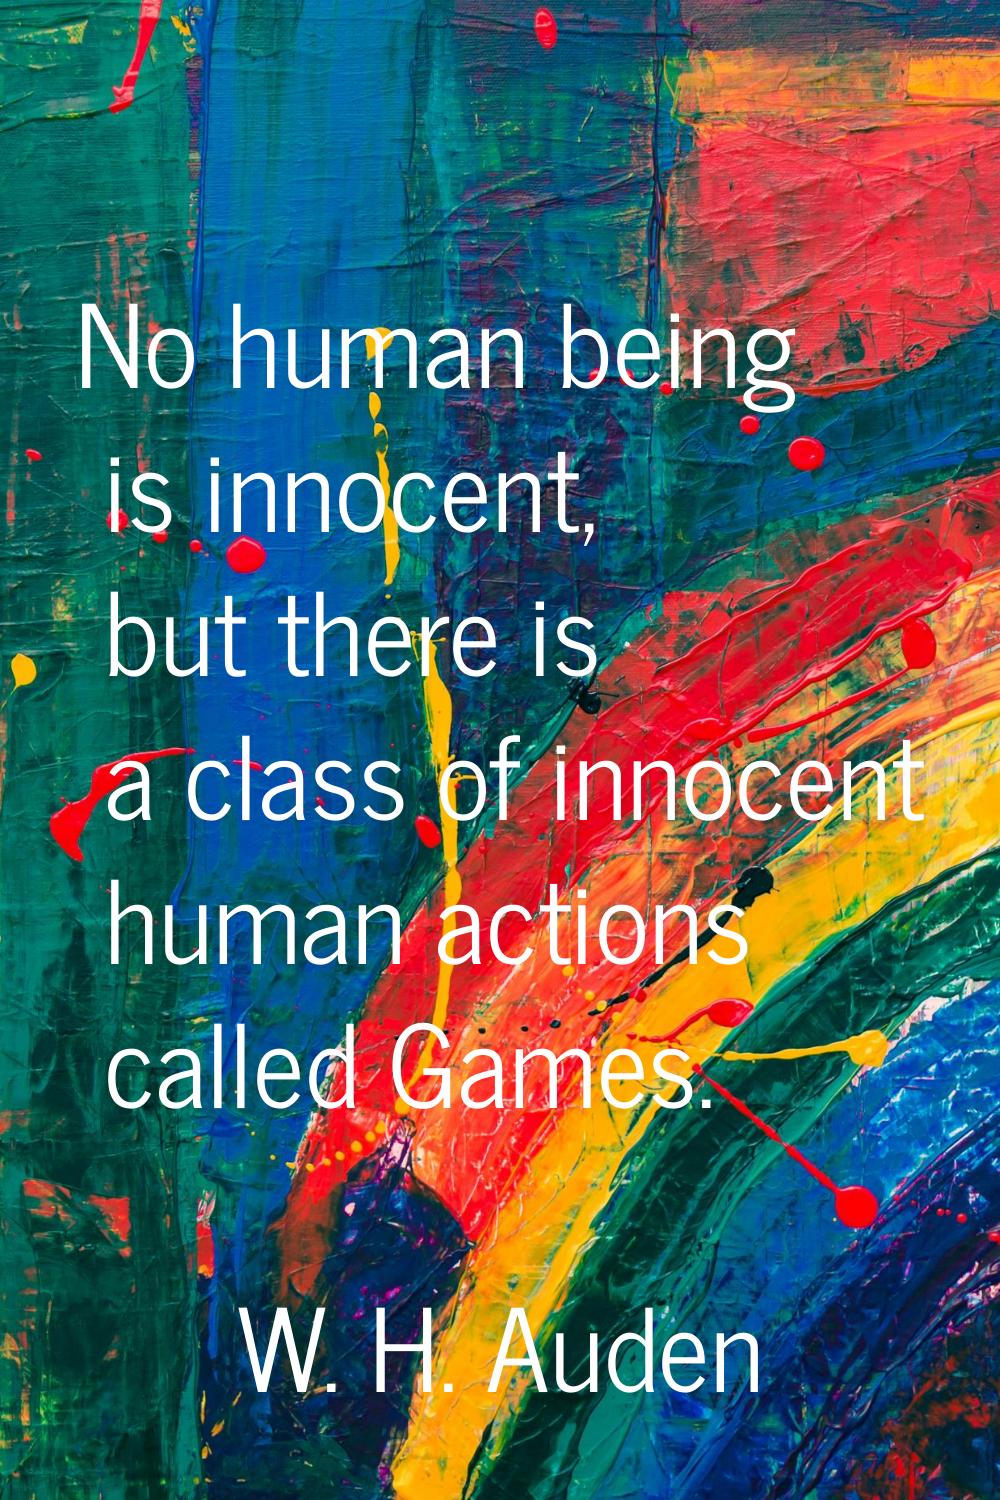 No human being is innocent, but there is a class of innocent human actions called Games.